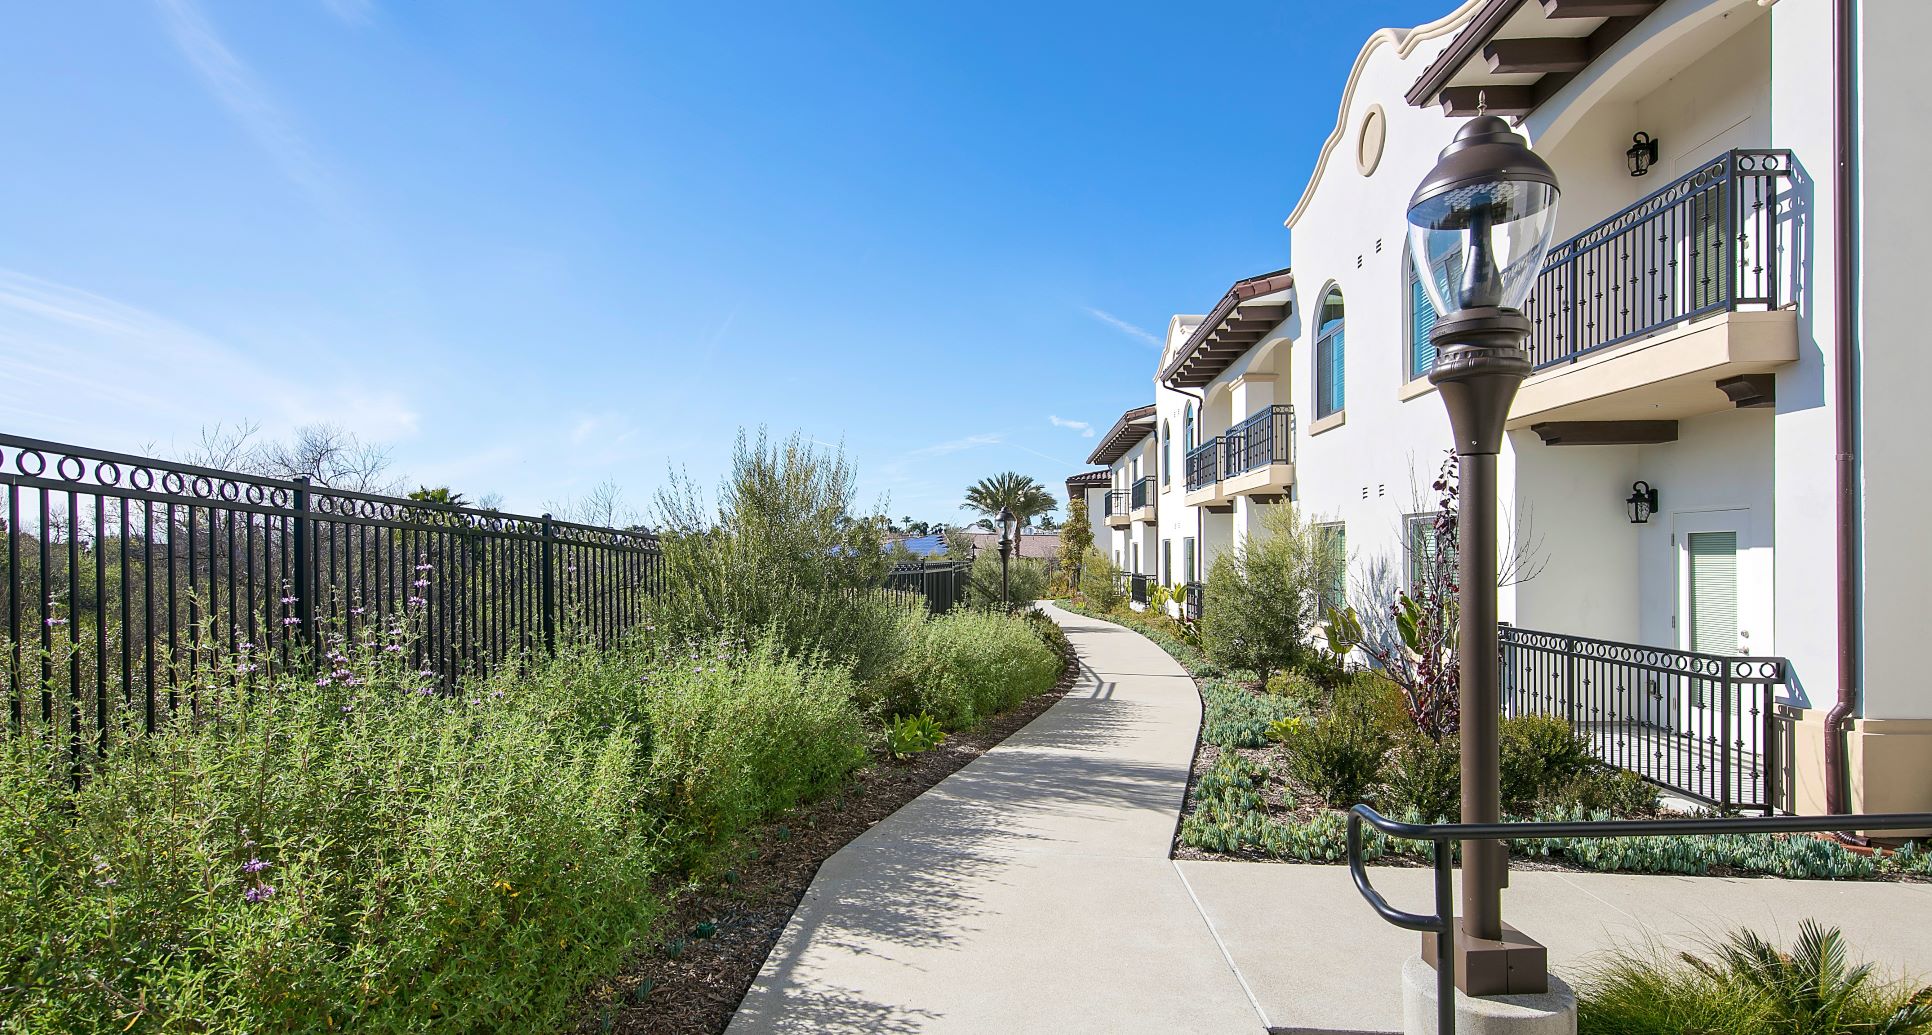 Explore the beautiful grounds of Pacifica Senior Living Oceanside.